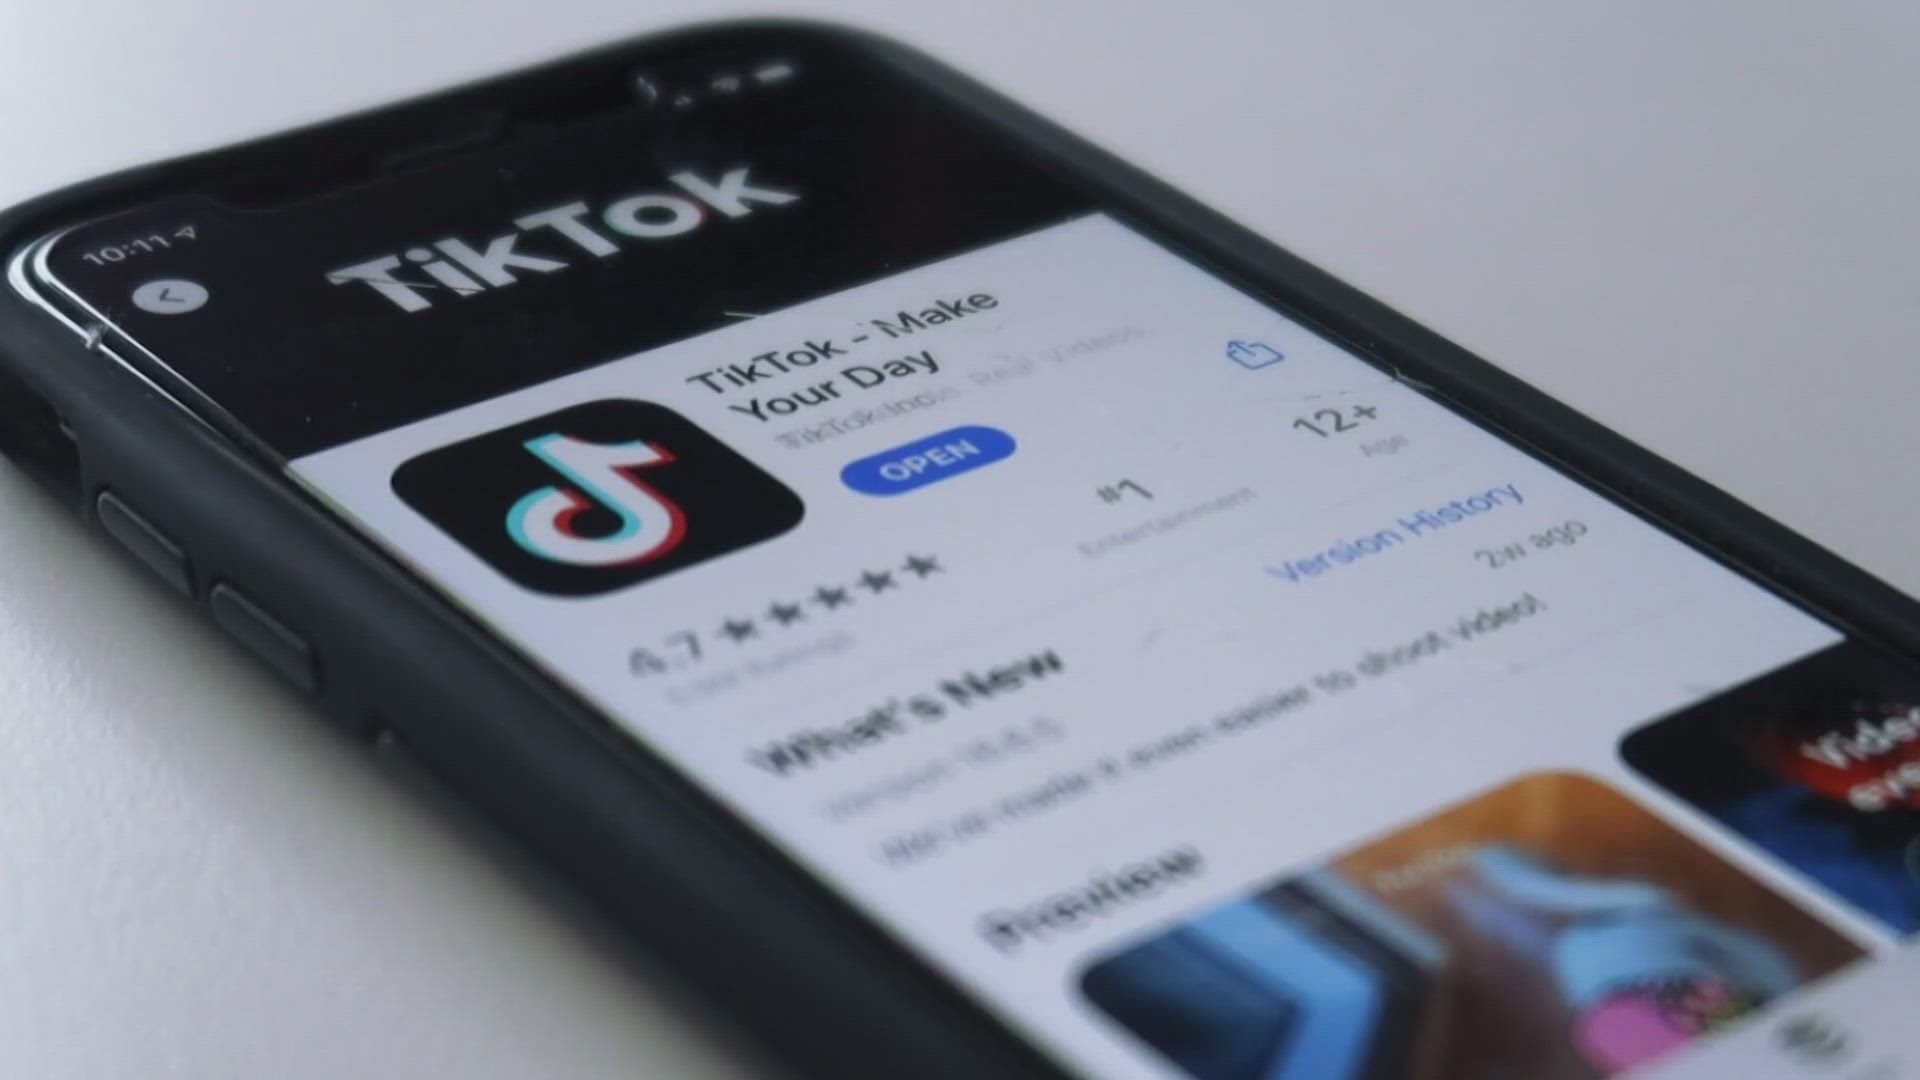 President Biden signed legislation that would force TikTok's owner, ByteDance, to sell its interest in the platform or face a ban.